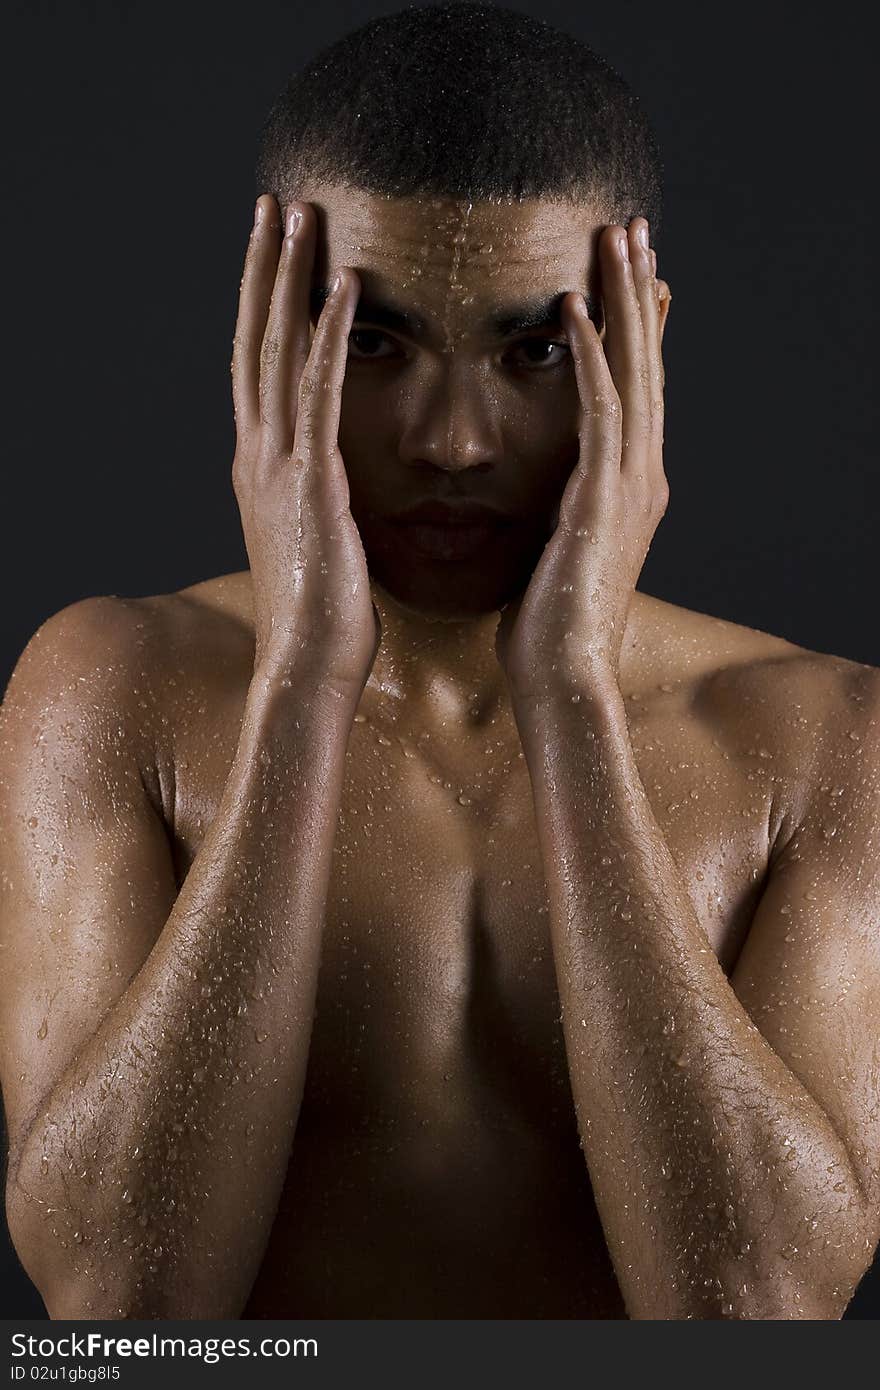 Drops of the water on naked body of a young man on black background. Drops of the water on naked body of a young man on black background.